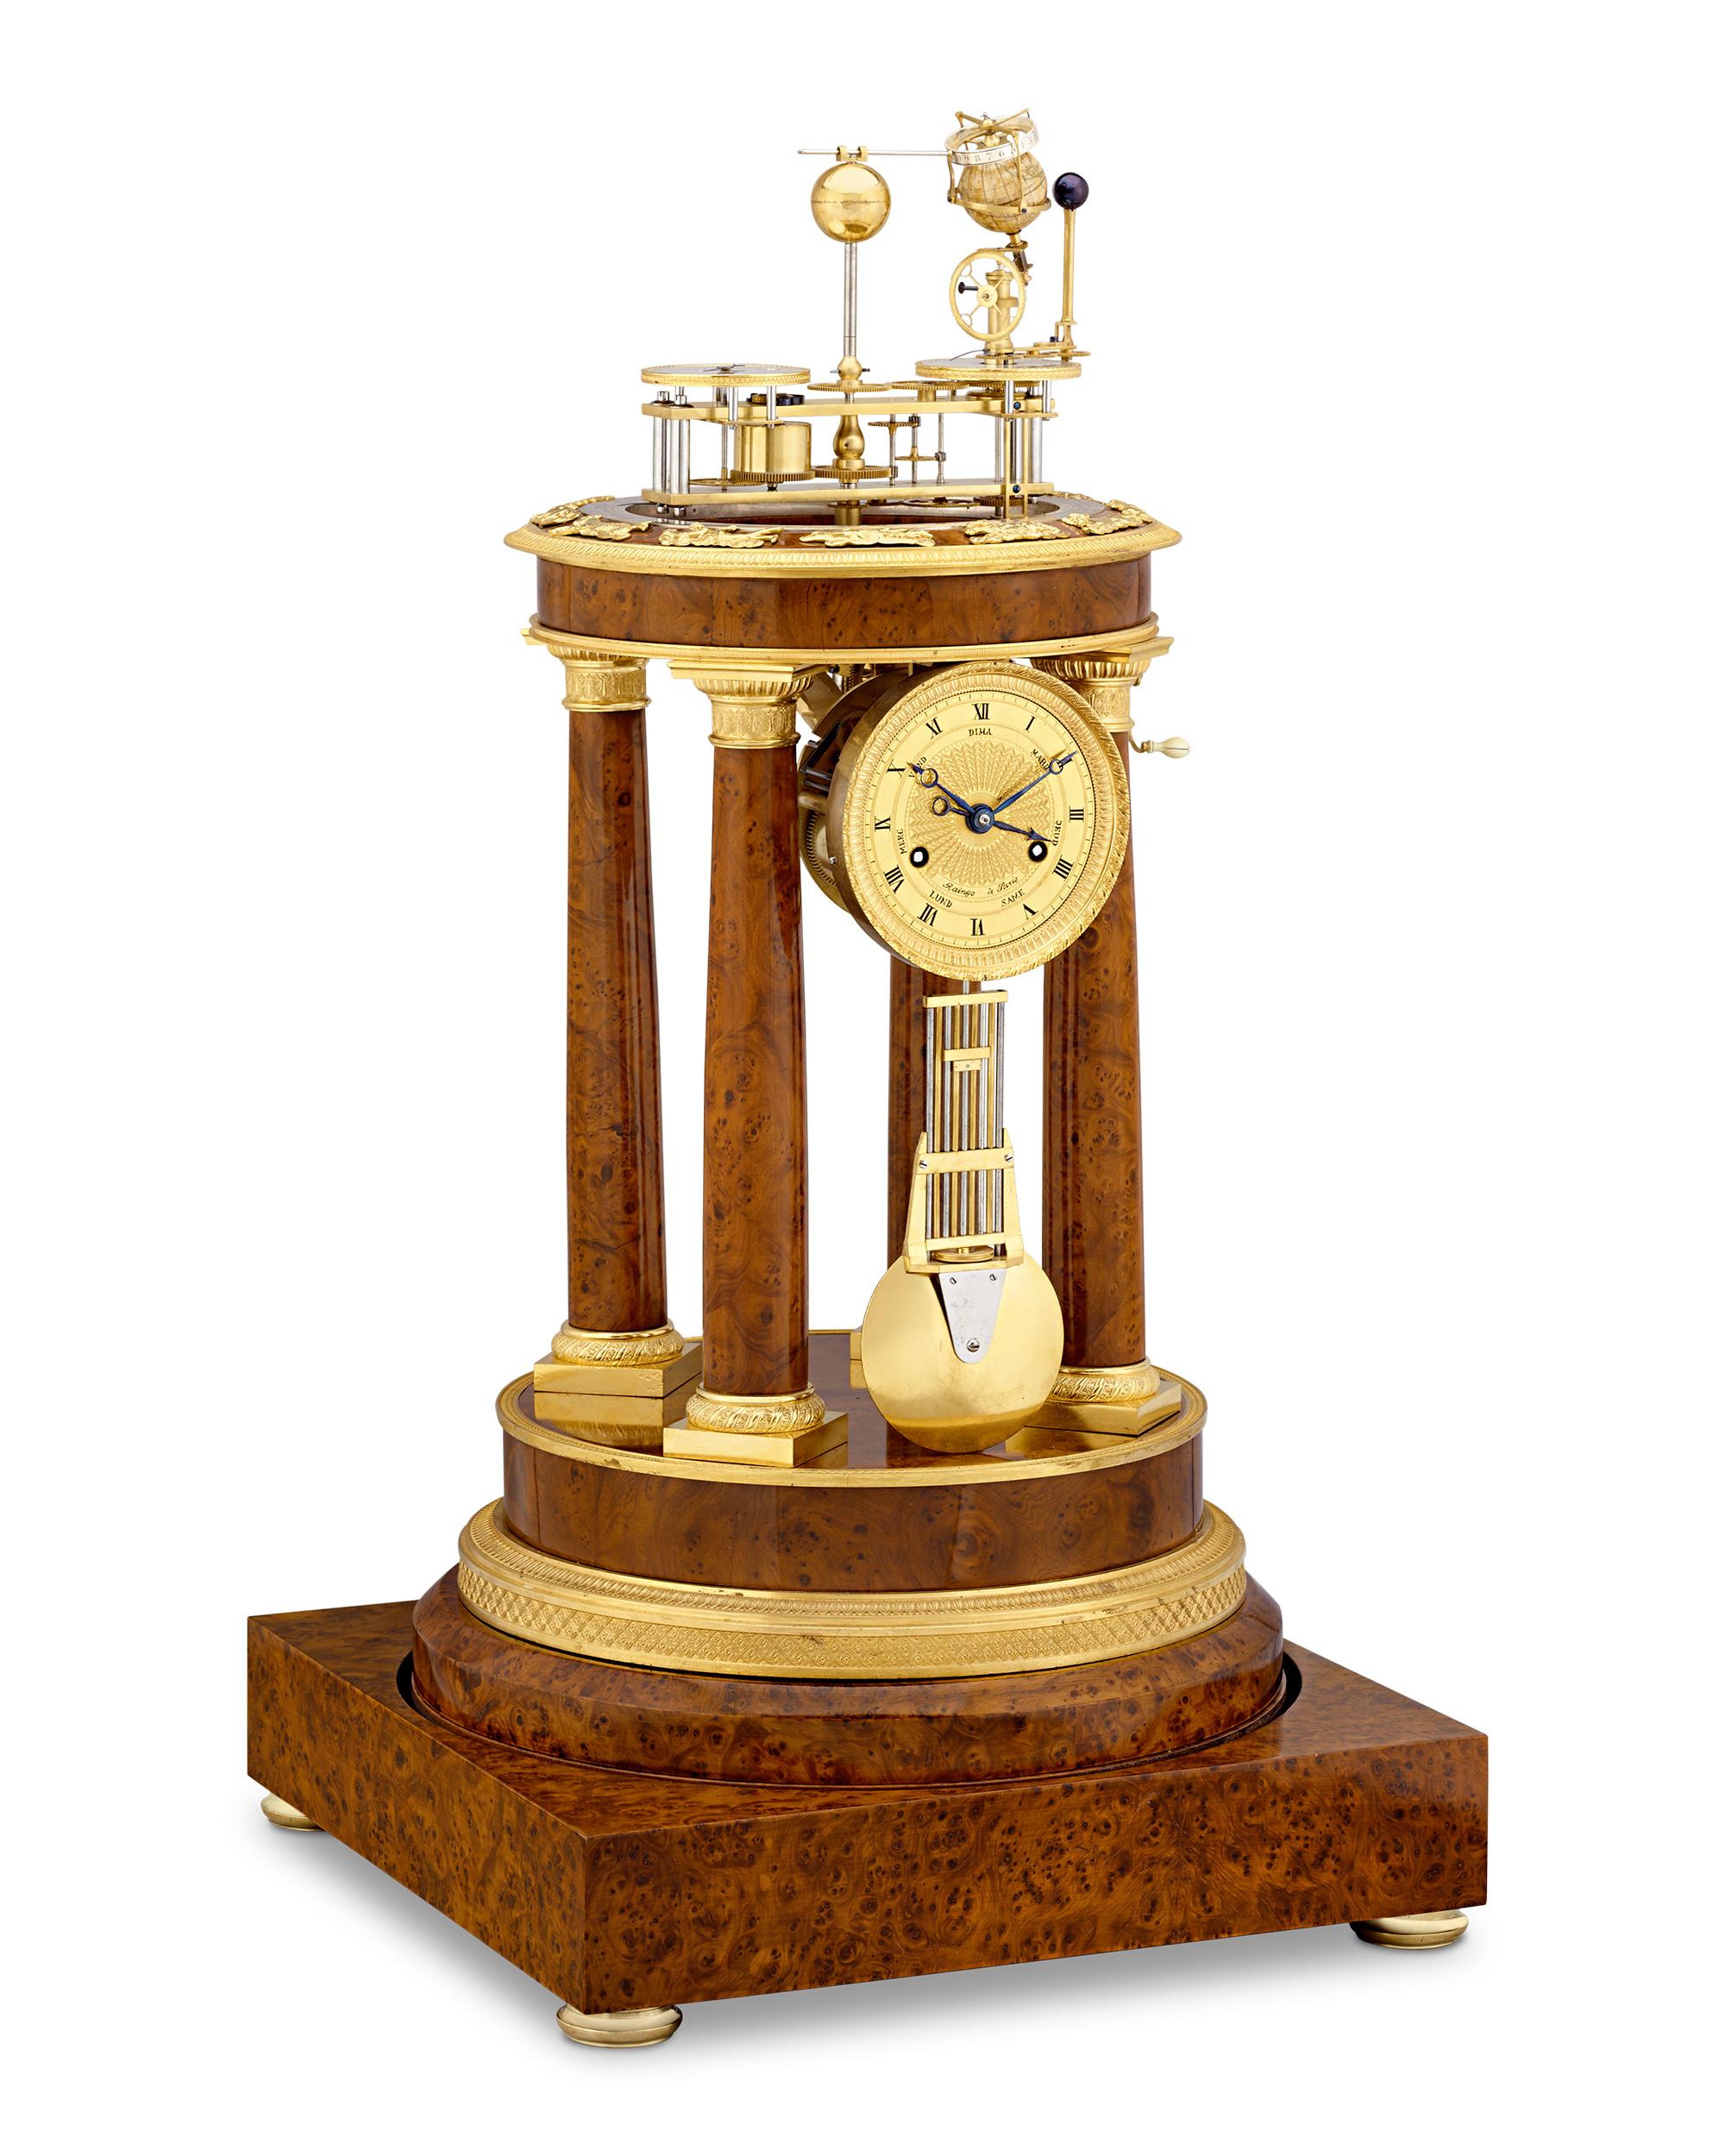 An incredible rarity of horological and astronomical significance, this stunning planetary clock was crafted by the renowned Parisian clockmaker Zacharie-Nicholas-Amé-Joseph Raingo. Raingo is celebrated as being the most important creator of orrery